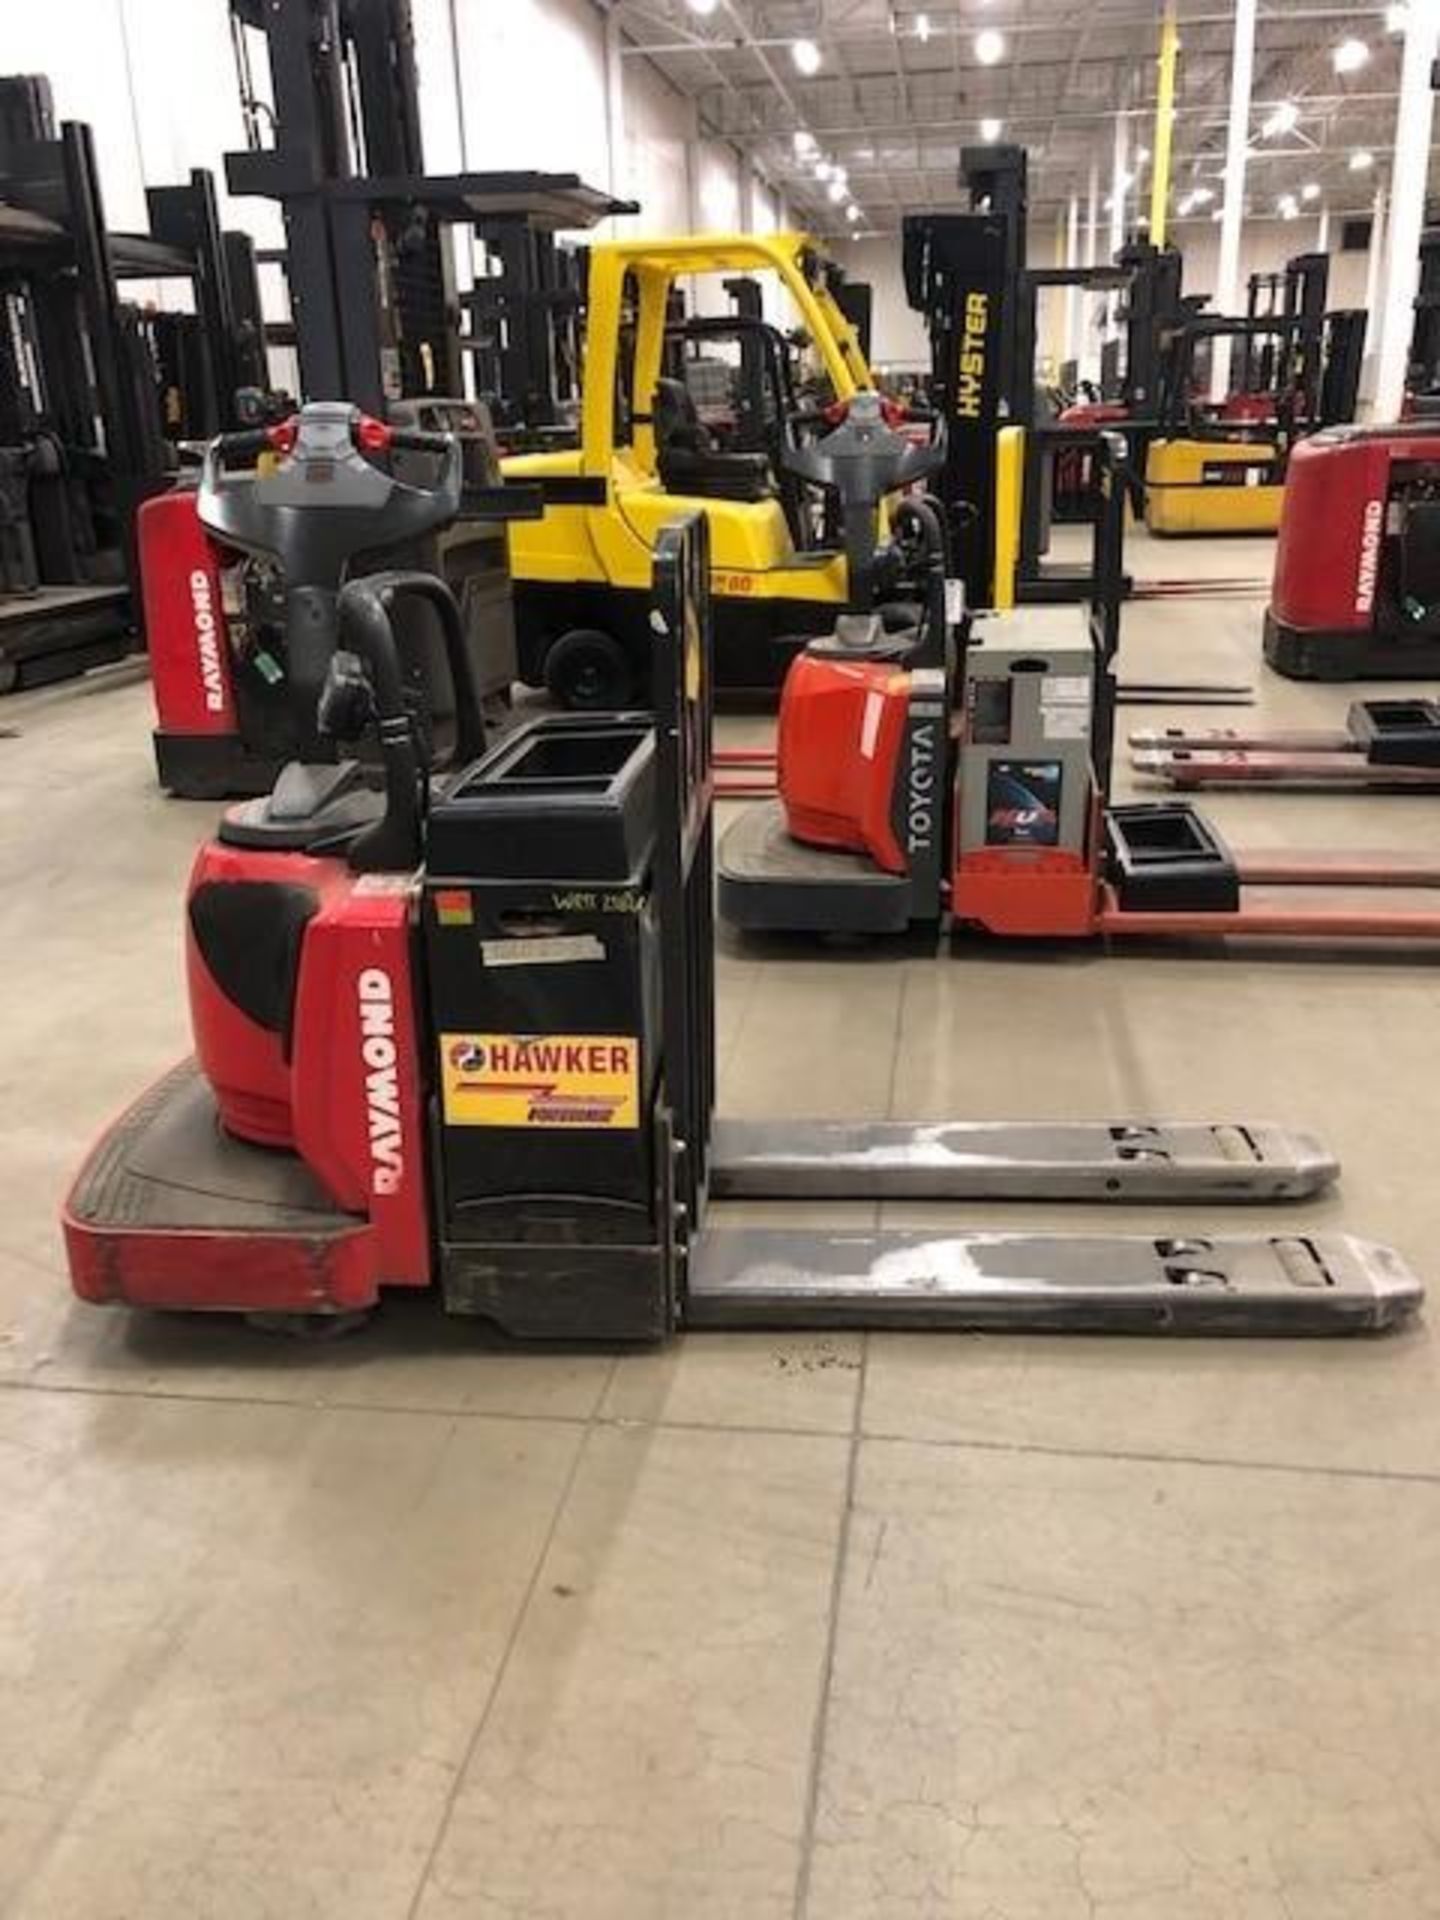 2012 RAYMOND 6,000 LB. CAPACITY ELECTRIC PALLET TRUCK; MODEL 8410, S/N 841-12-12011, WITH IWAREHOUSE - Image 4 of 5